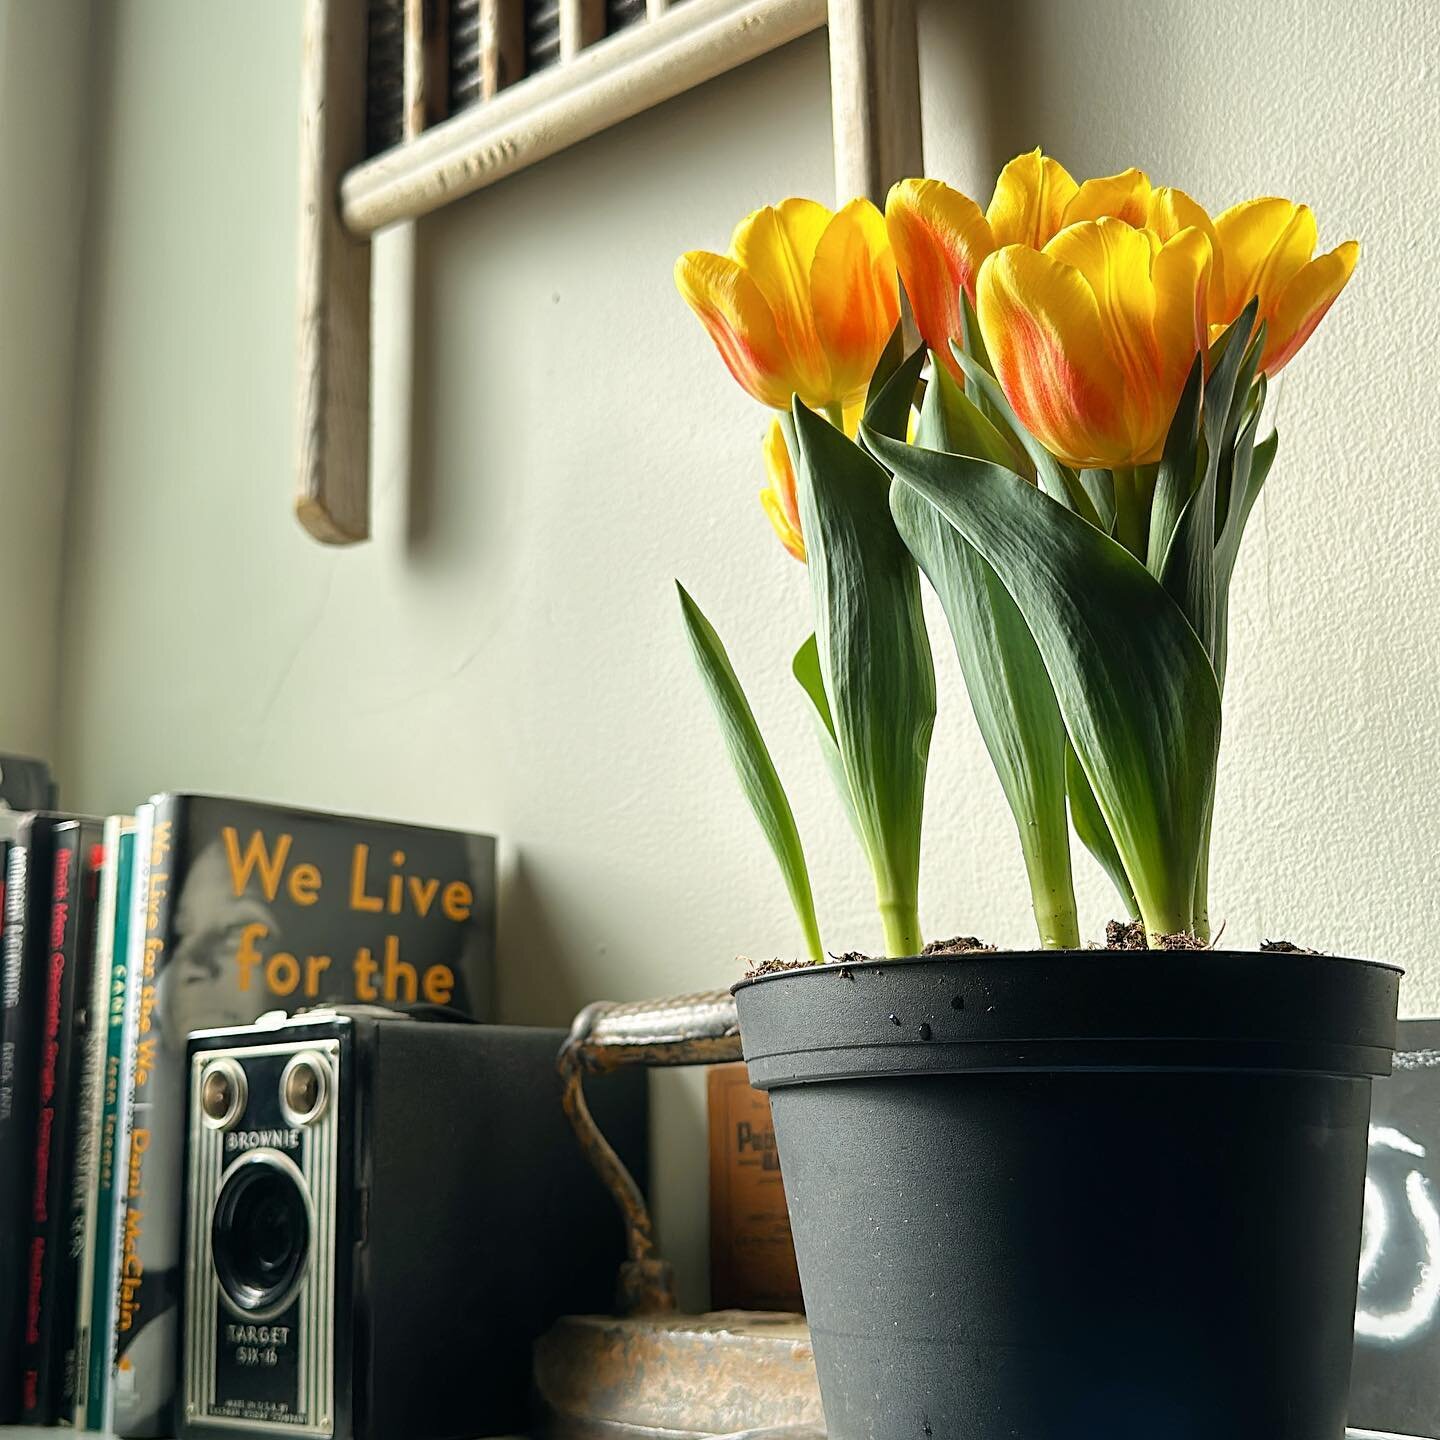 Yellow tulips finally blooming atop my favorite bookcase &mdash; it&rsquo;s the simple things, especially natural beauty &mdash; that give me pause &mdash; that bring joy &mdash; that pull my attention back to gratitude &mdash; in this life &mdash; l